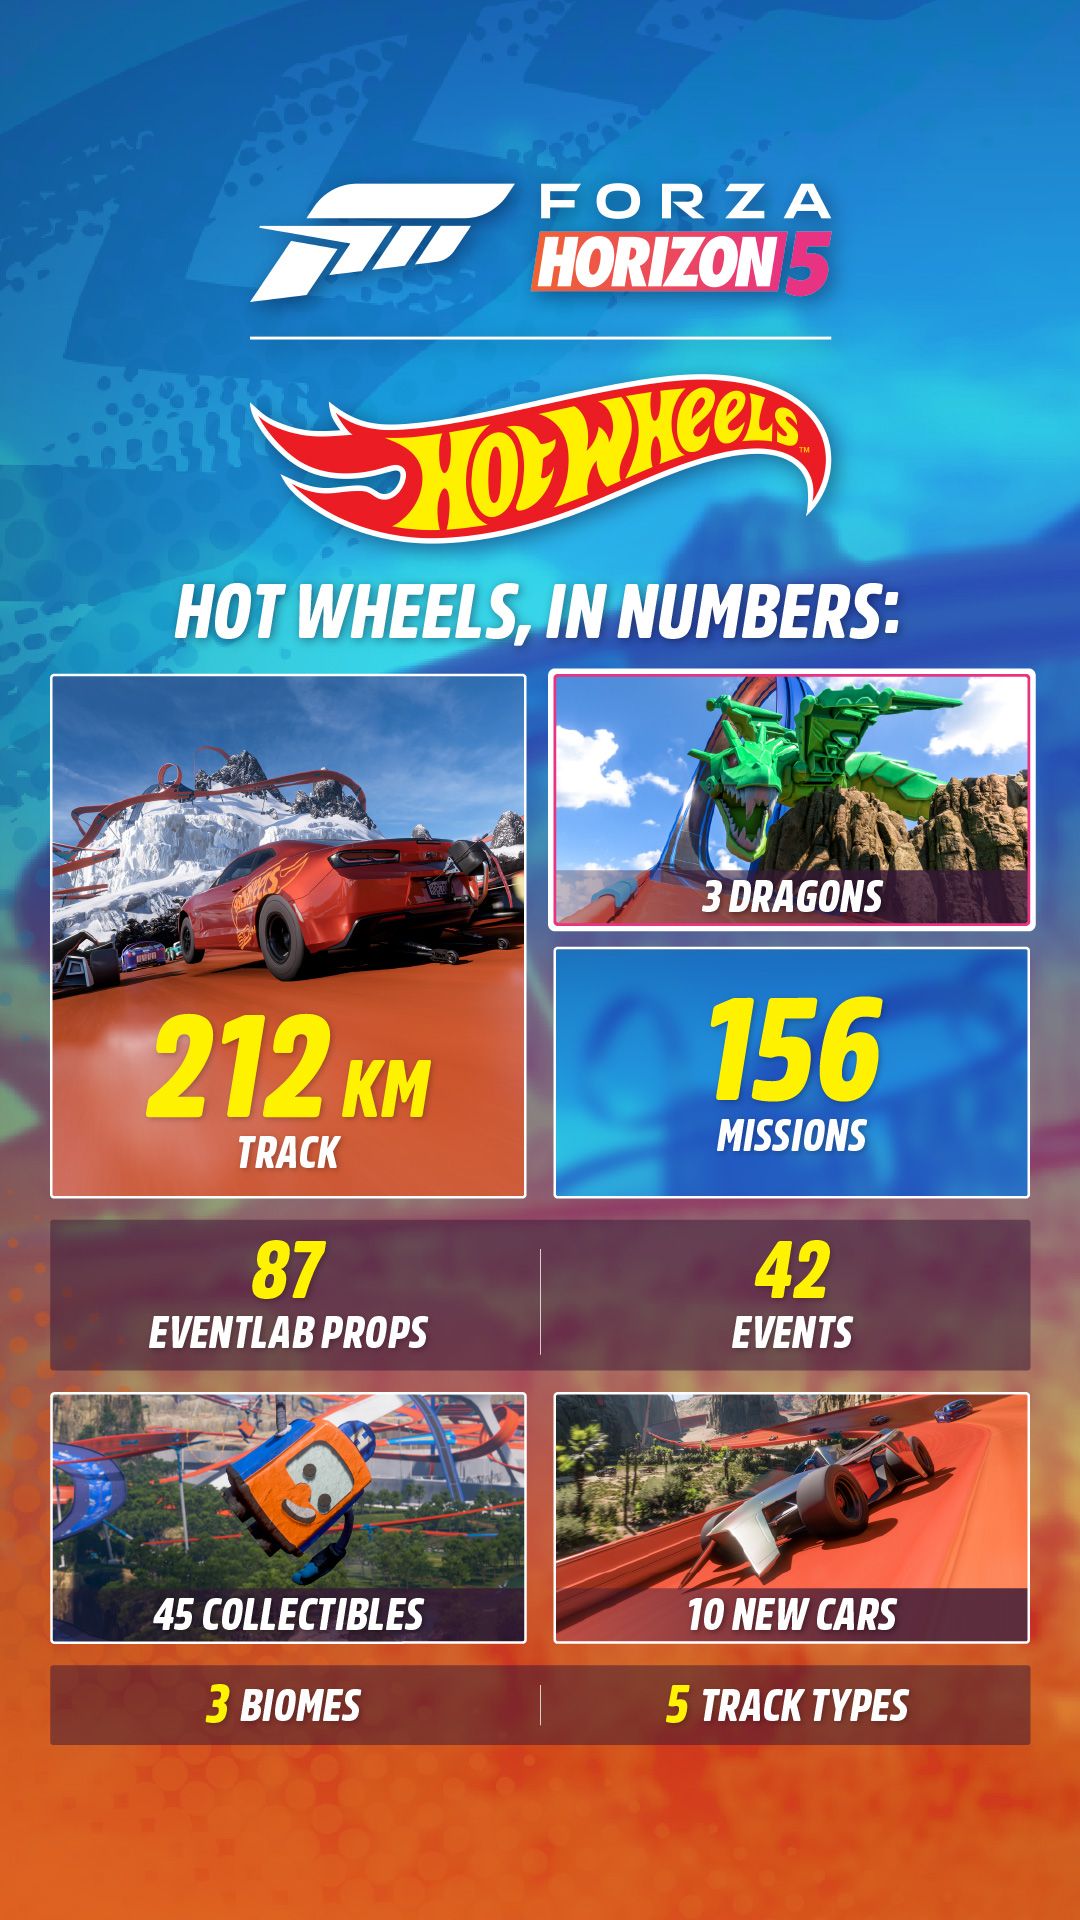 Forza Horizon 5: Hot Wheels "Expansion in Numbers" infographic: Track: 212 KM, 87 EventLab Props, 45 Collectibles, 3 Dragons, 10 New Cars, 156 Missions, 3 Biomes, 5 Track Types, 42 Events